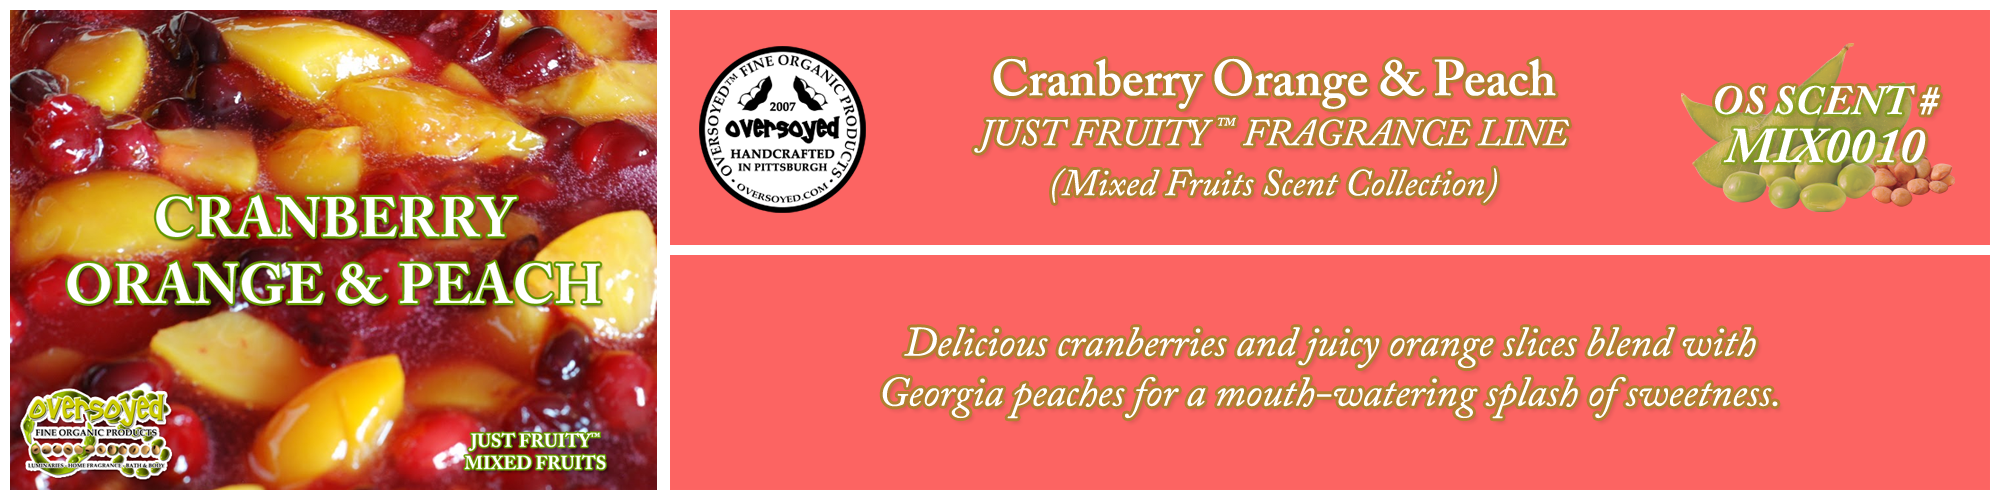 Cranberry Orange & Peach Handcrafted Products Collection